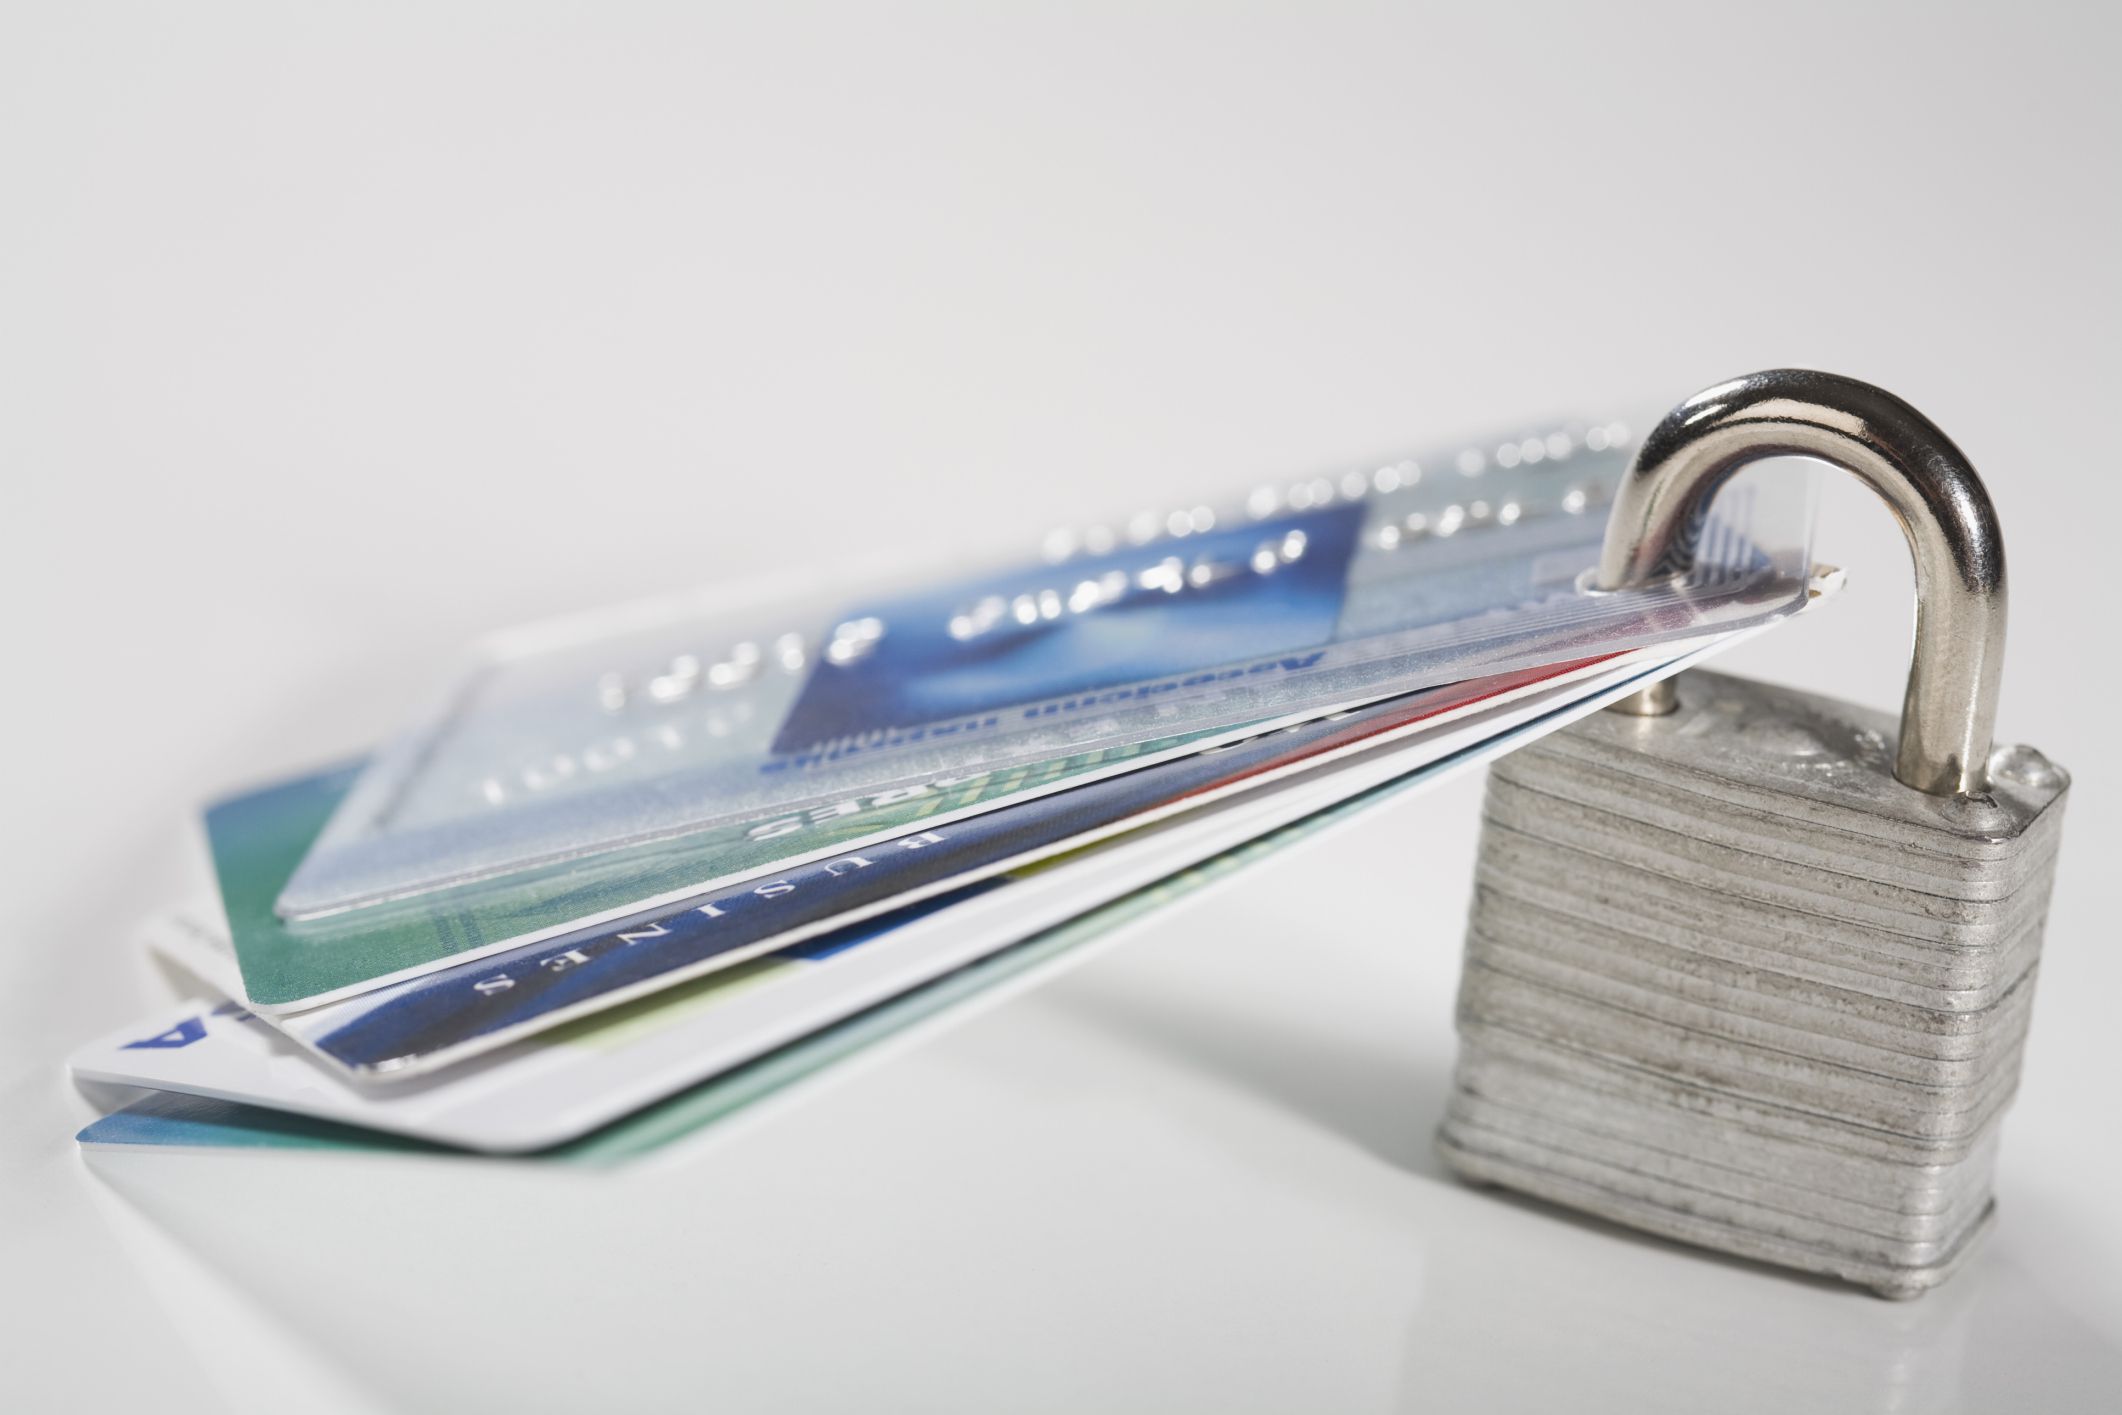 How to Prevent Credit Card Theft Online?